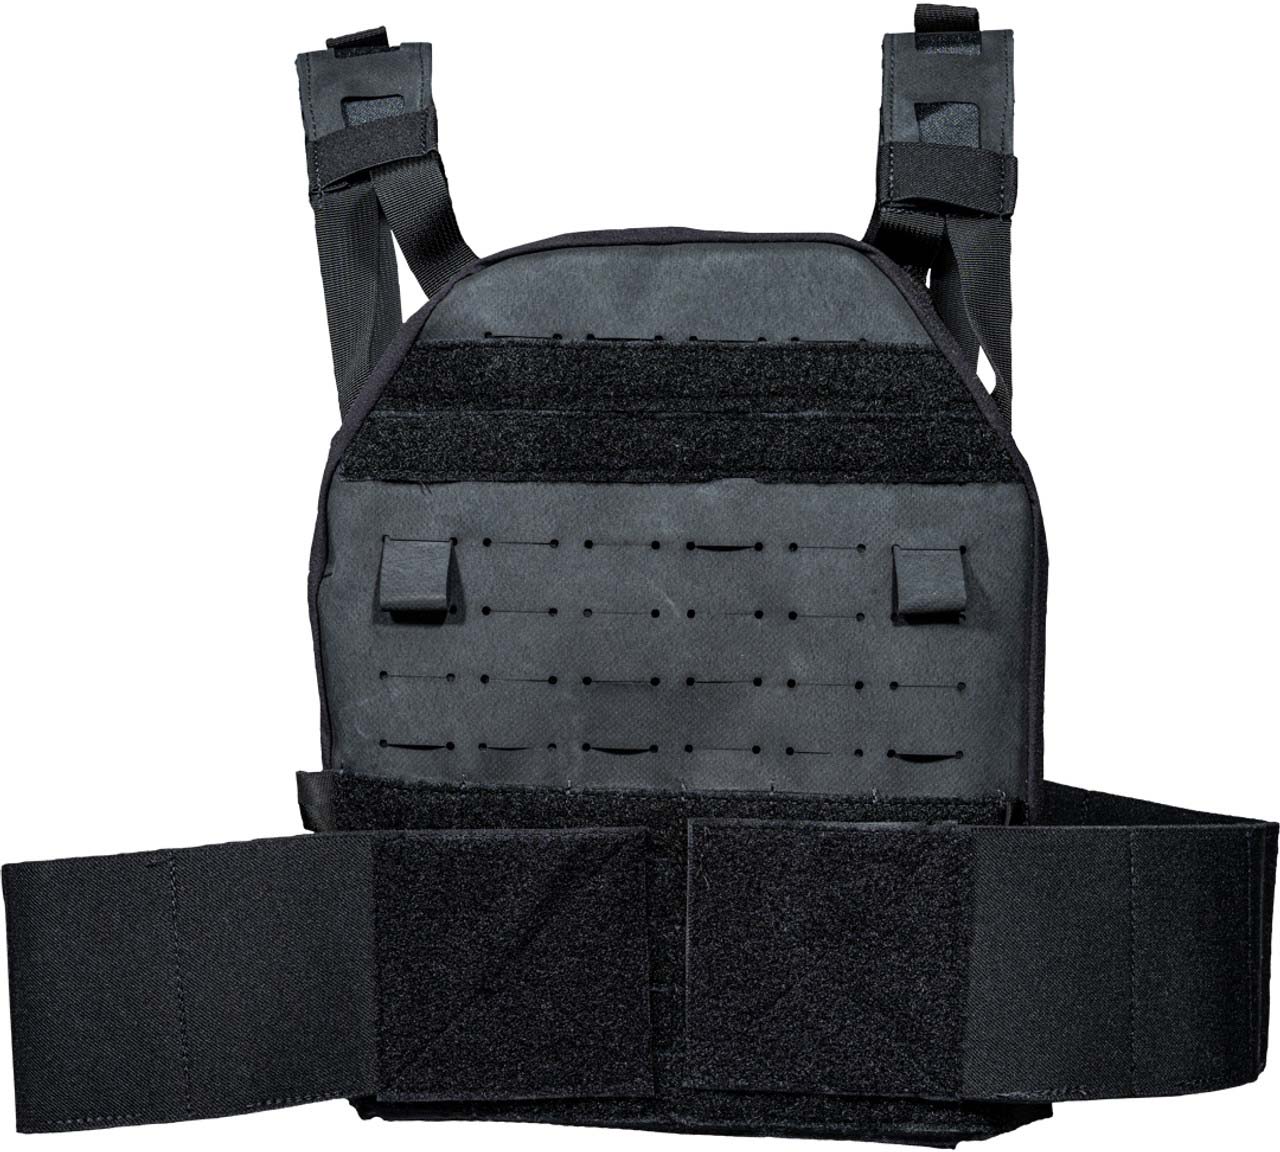 Tactical Tailor Rogue Plate Carrier